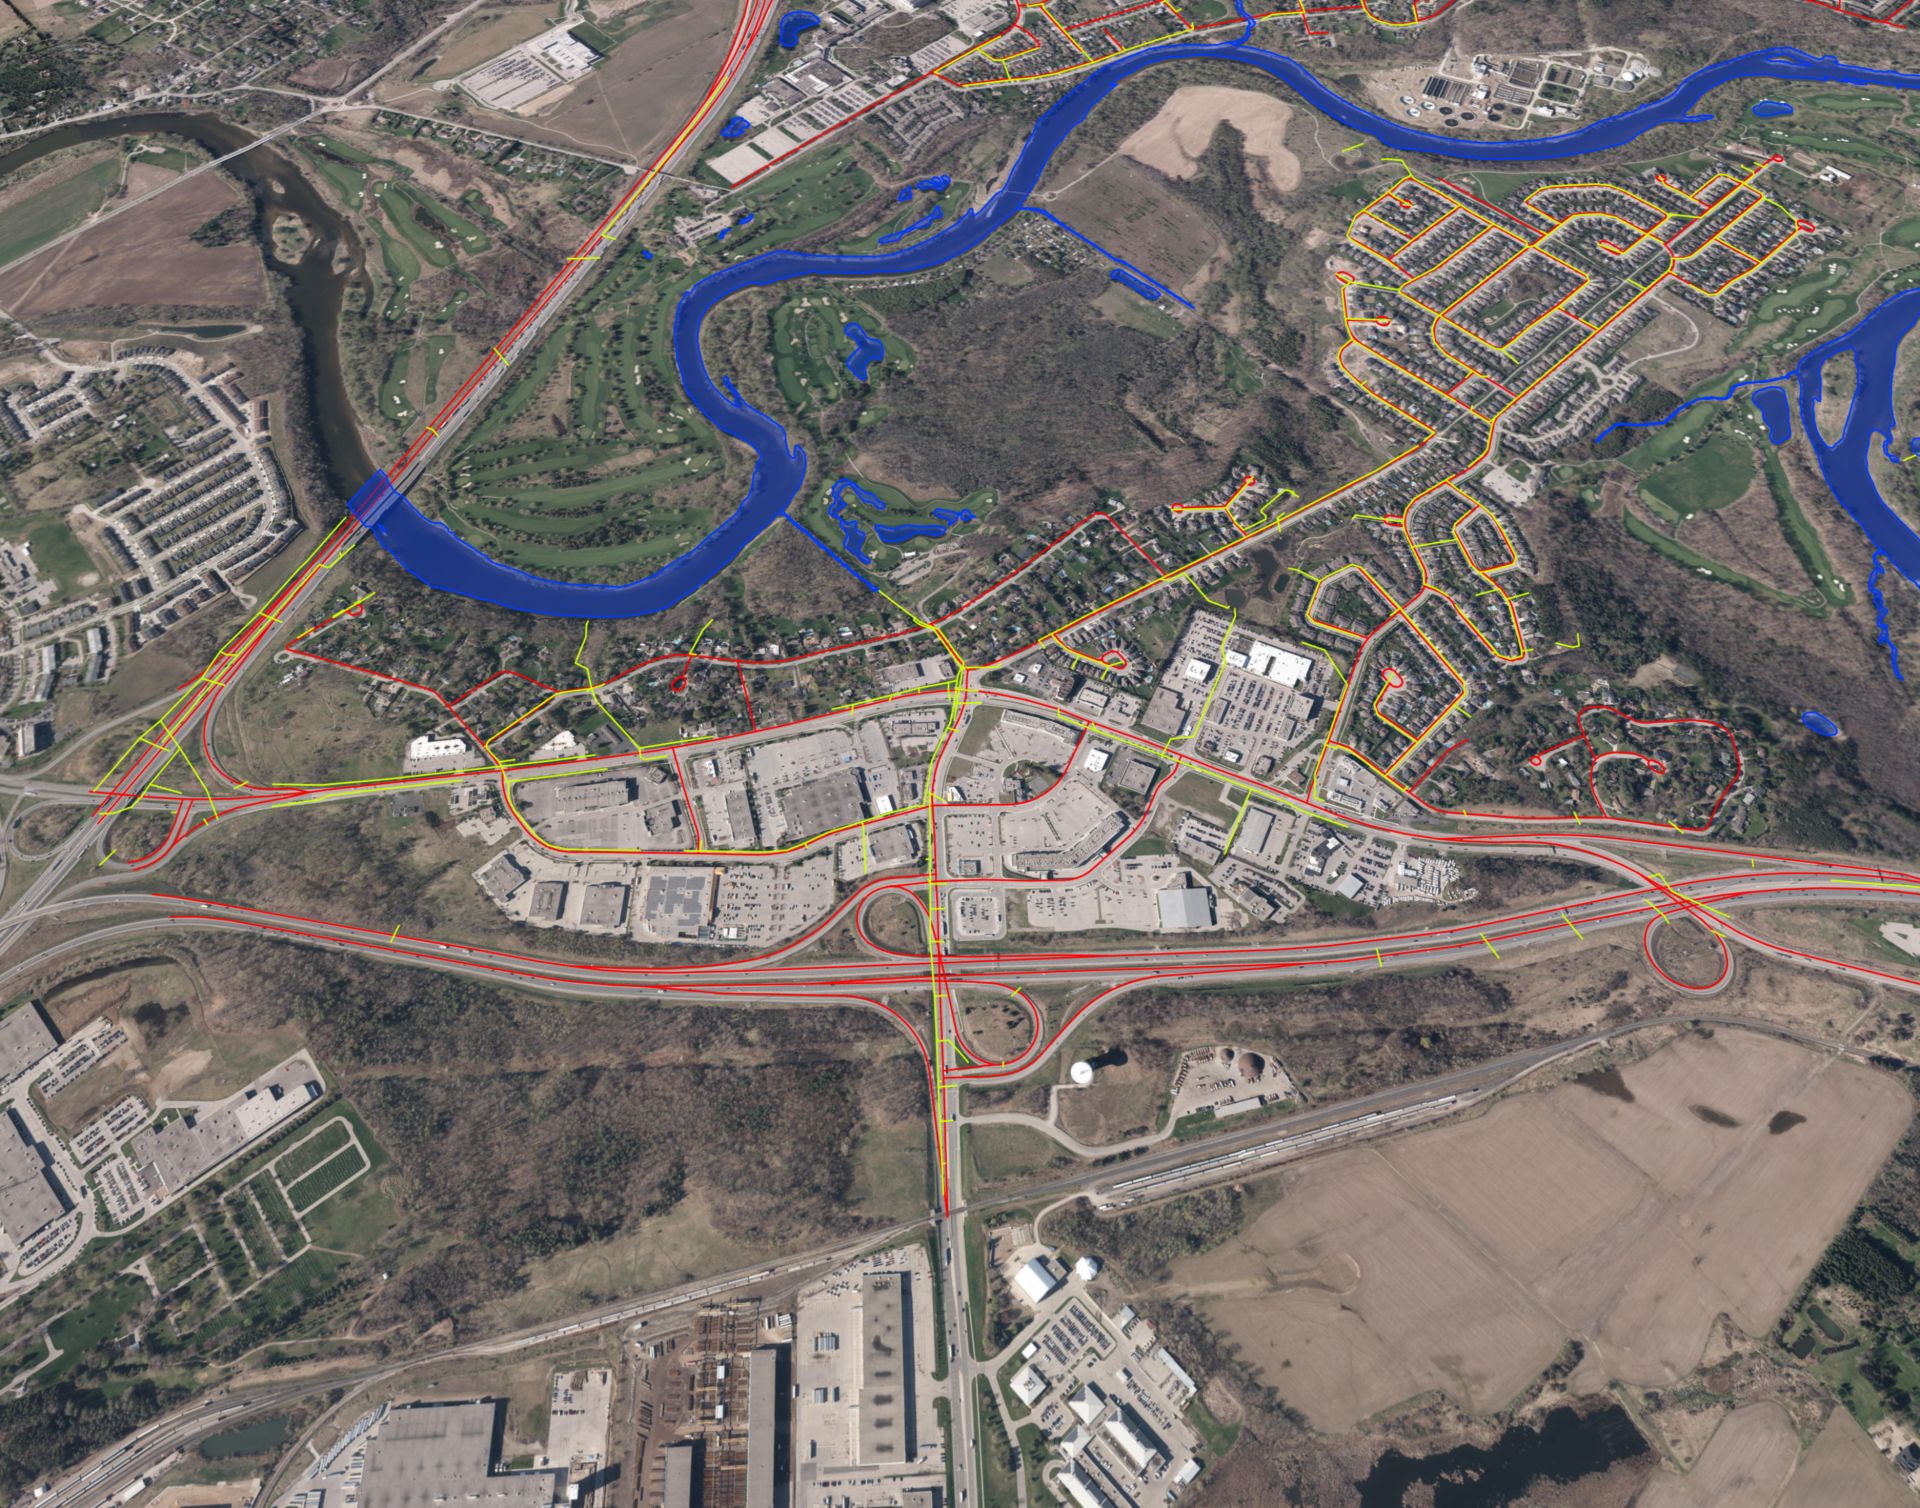 kml files on an online map showing roads and river